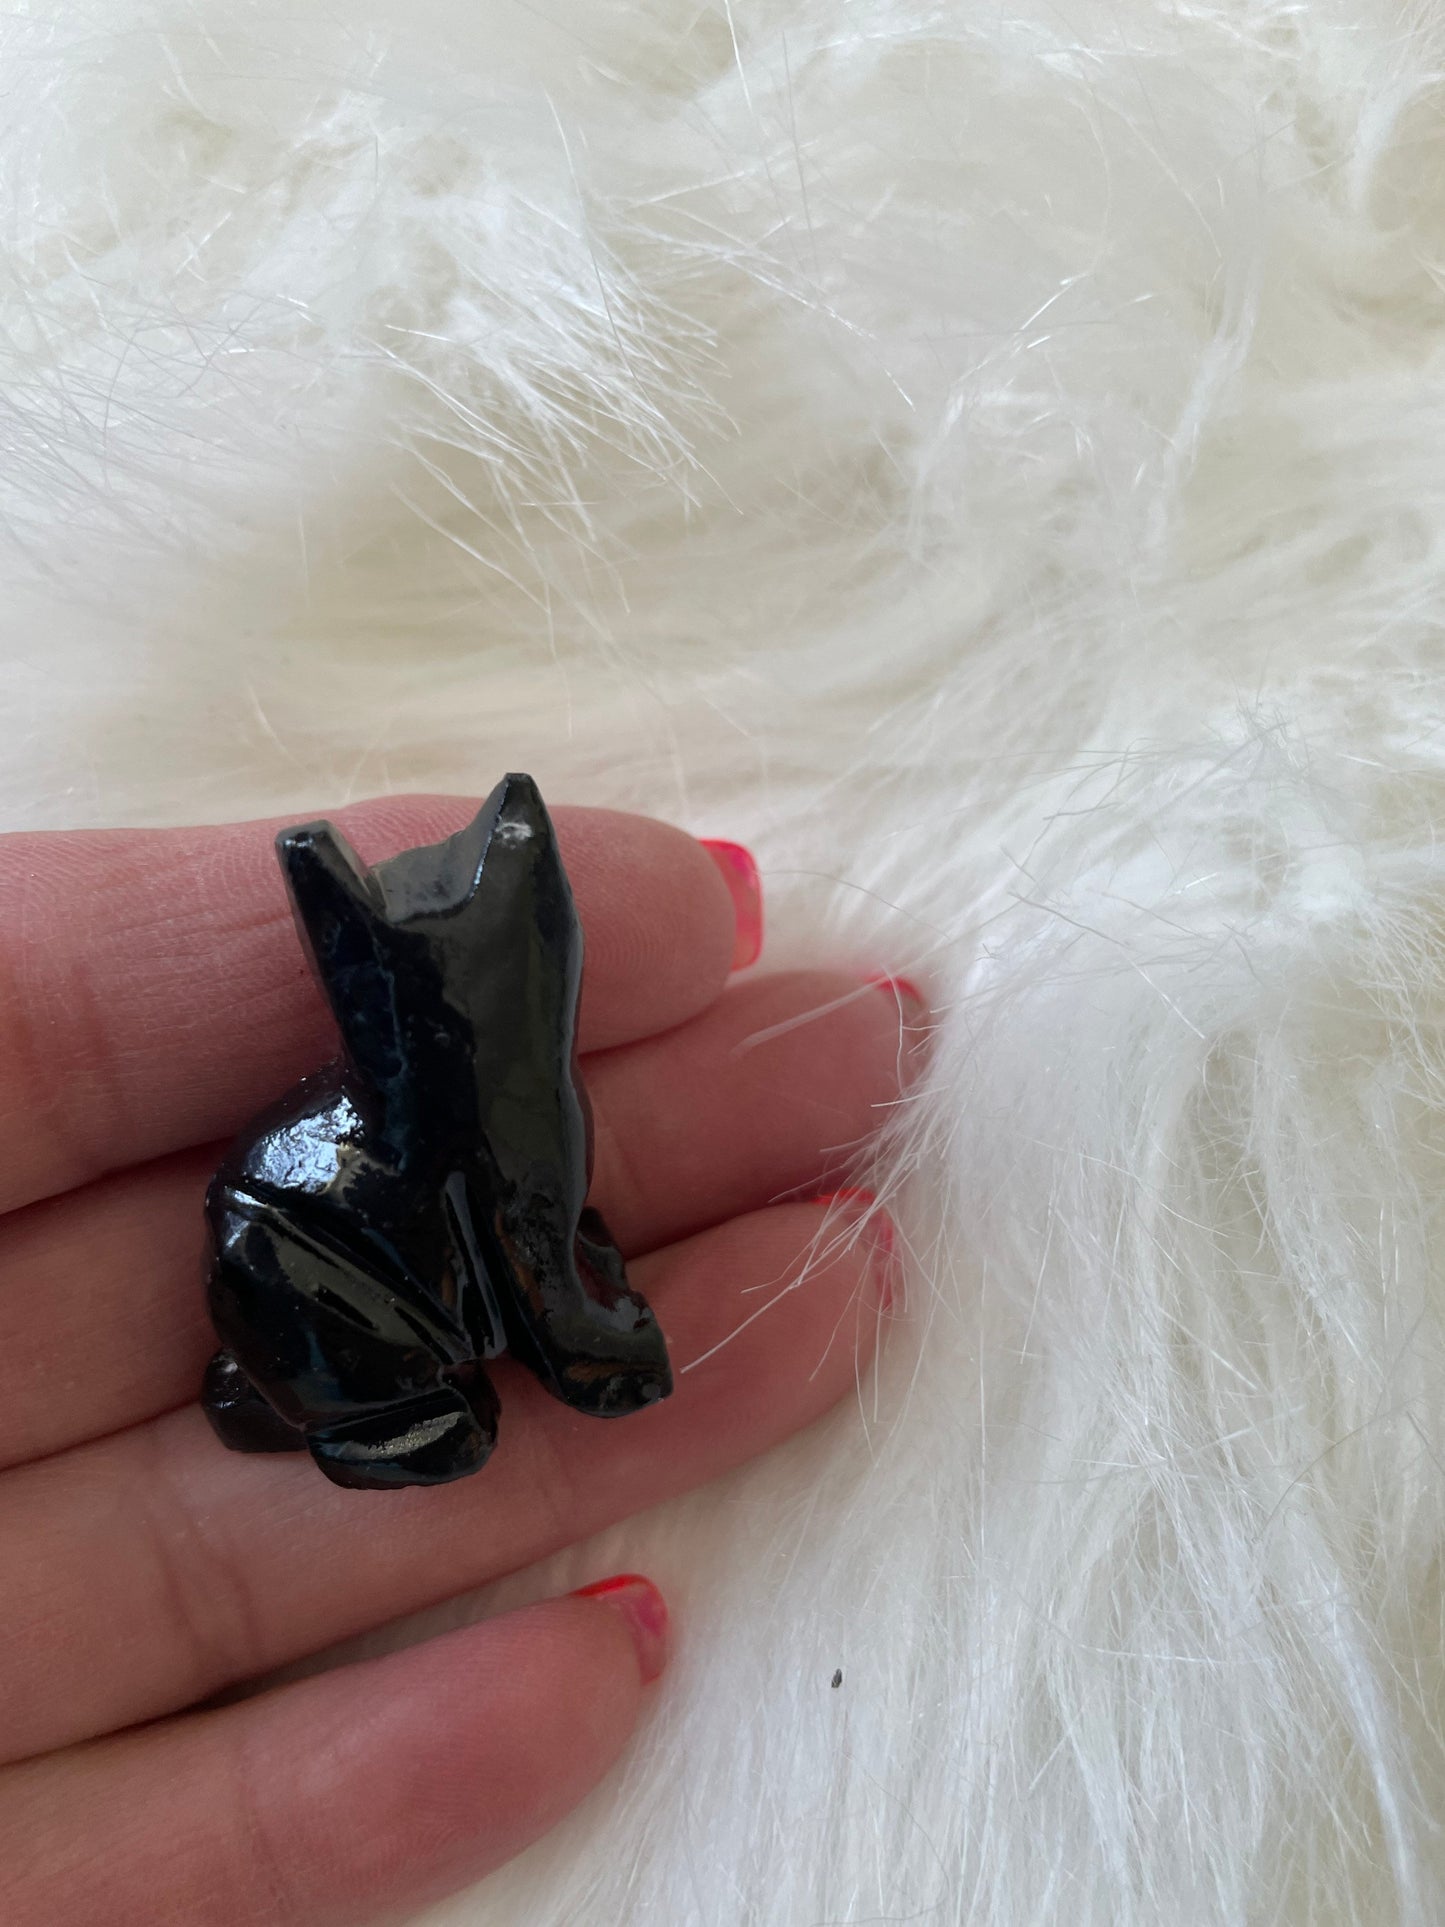 Black Onyx Spirit Animal Black Cat meaning intuition